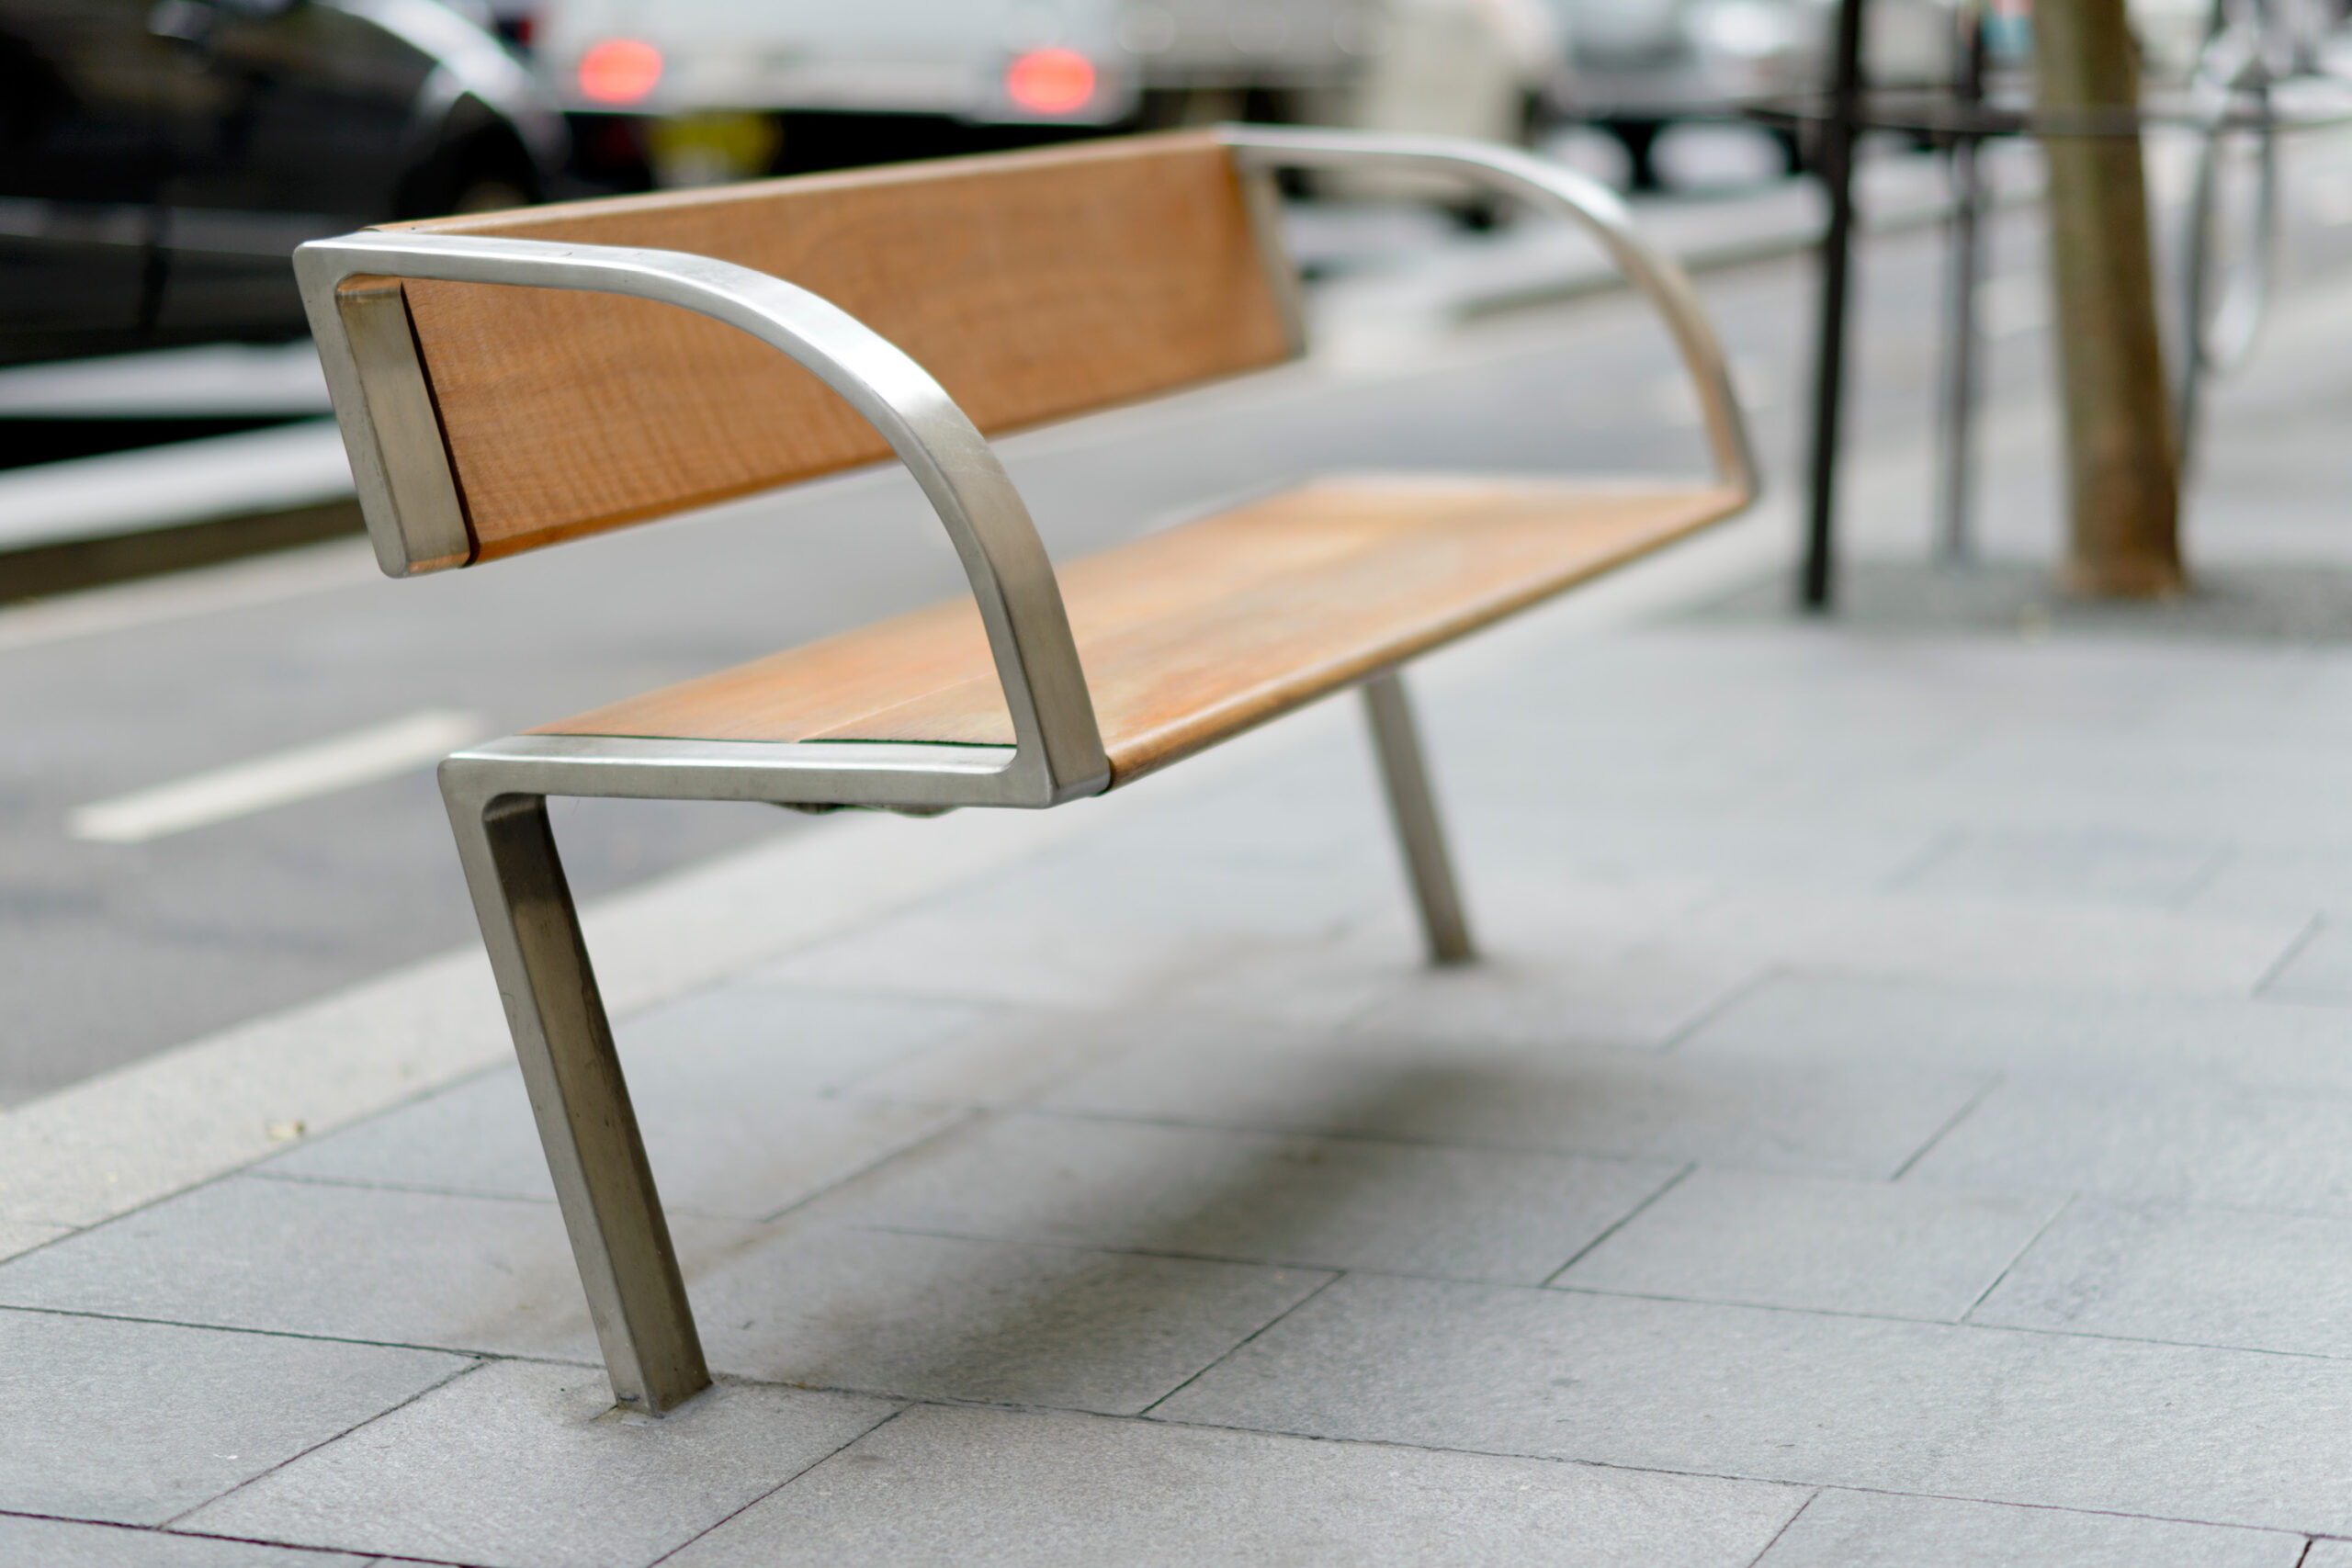 Photograph of the award-wining street bench by Tzannes for City of Sydney